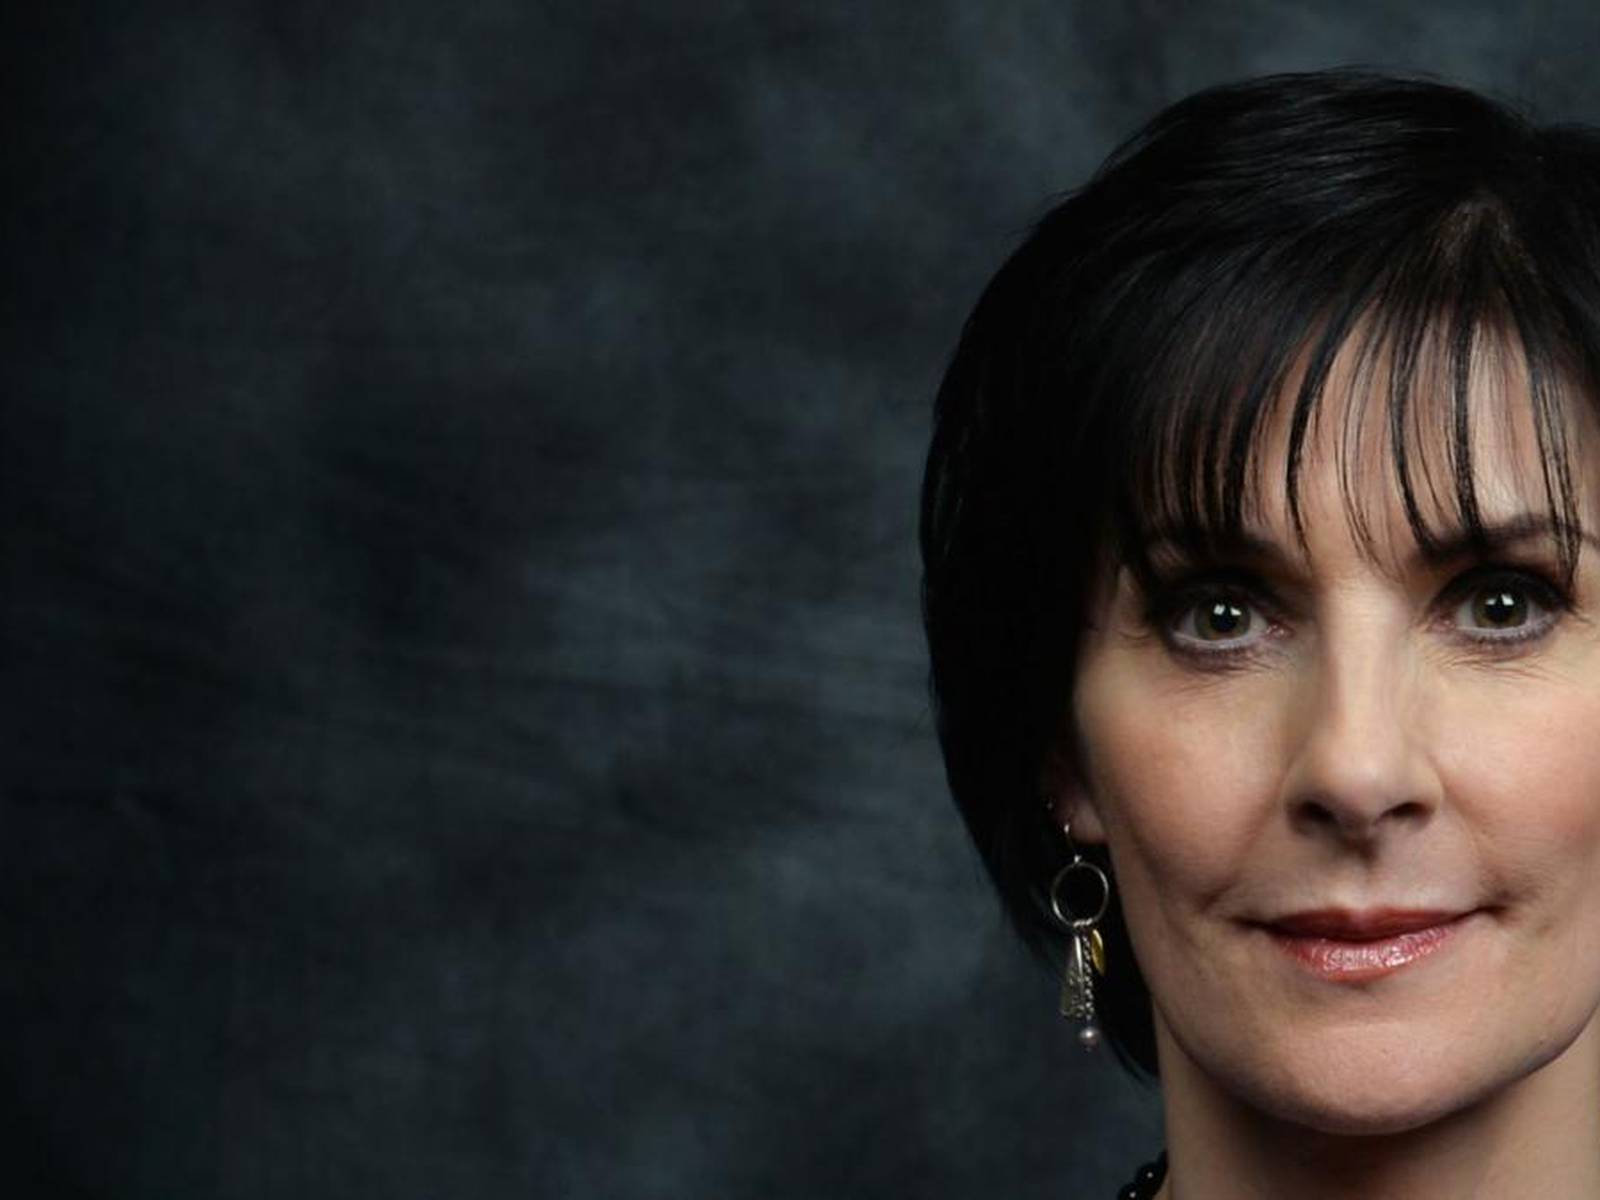 Irish singer Enya returns with ethereal style she's made her own